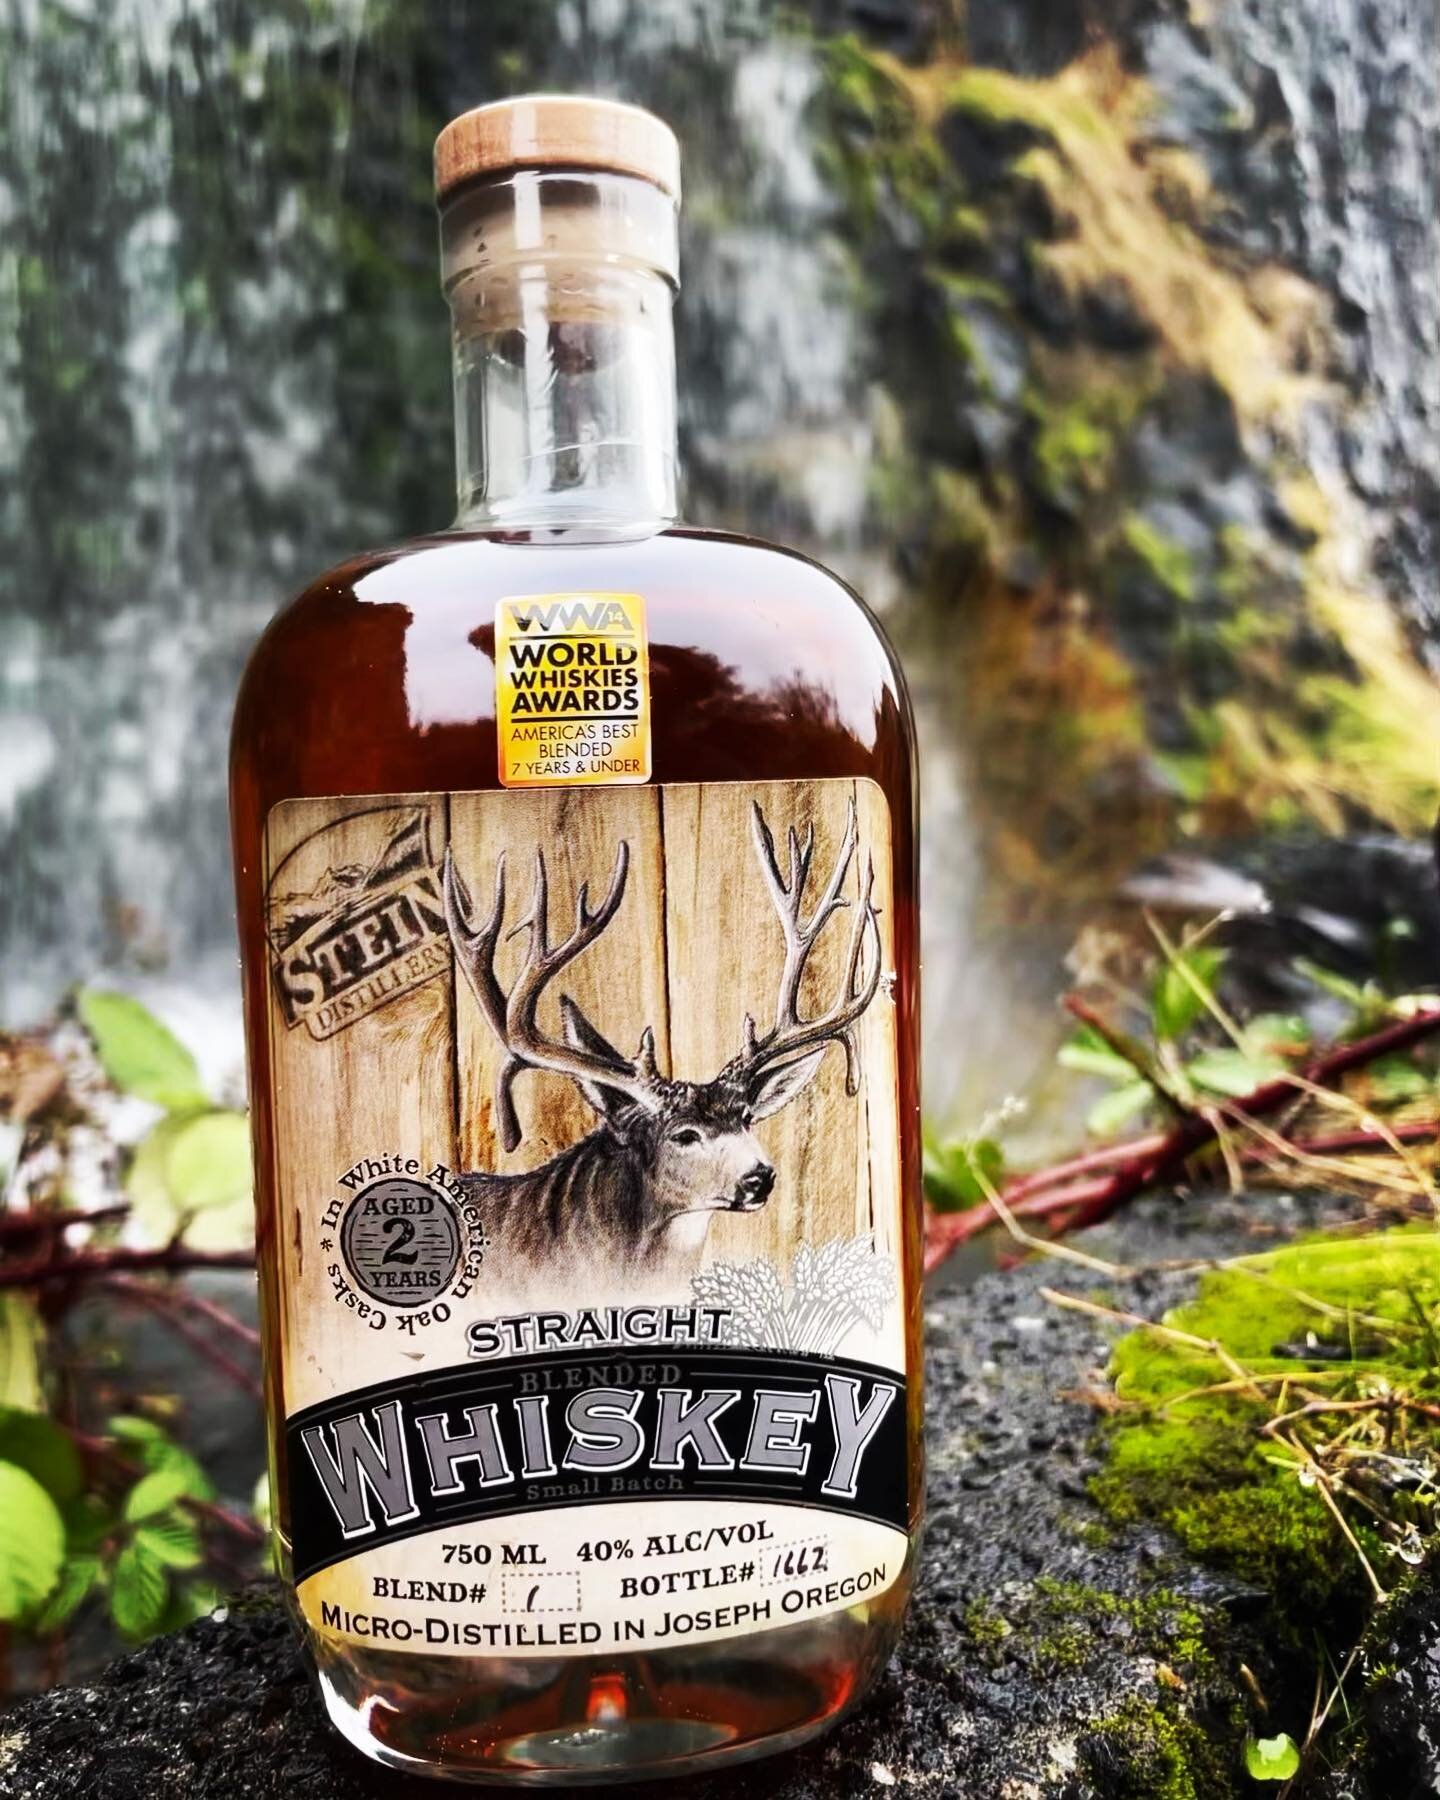 &ldquo;That buck is a shooter for sure&rdquo; 
Have you tried our big buck blended whiskey? 
.
.
.
.
.

#cocktails #craftspirits #whiskey #bourbon #rum #rye #vodka #blend #mix #drink #distill #artisancocktail #spiritforward #cheers  #craft #craftcock